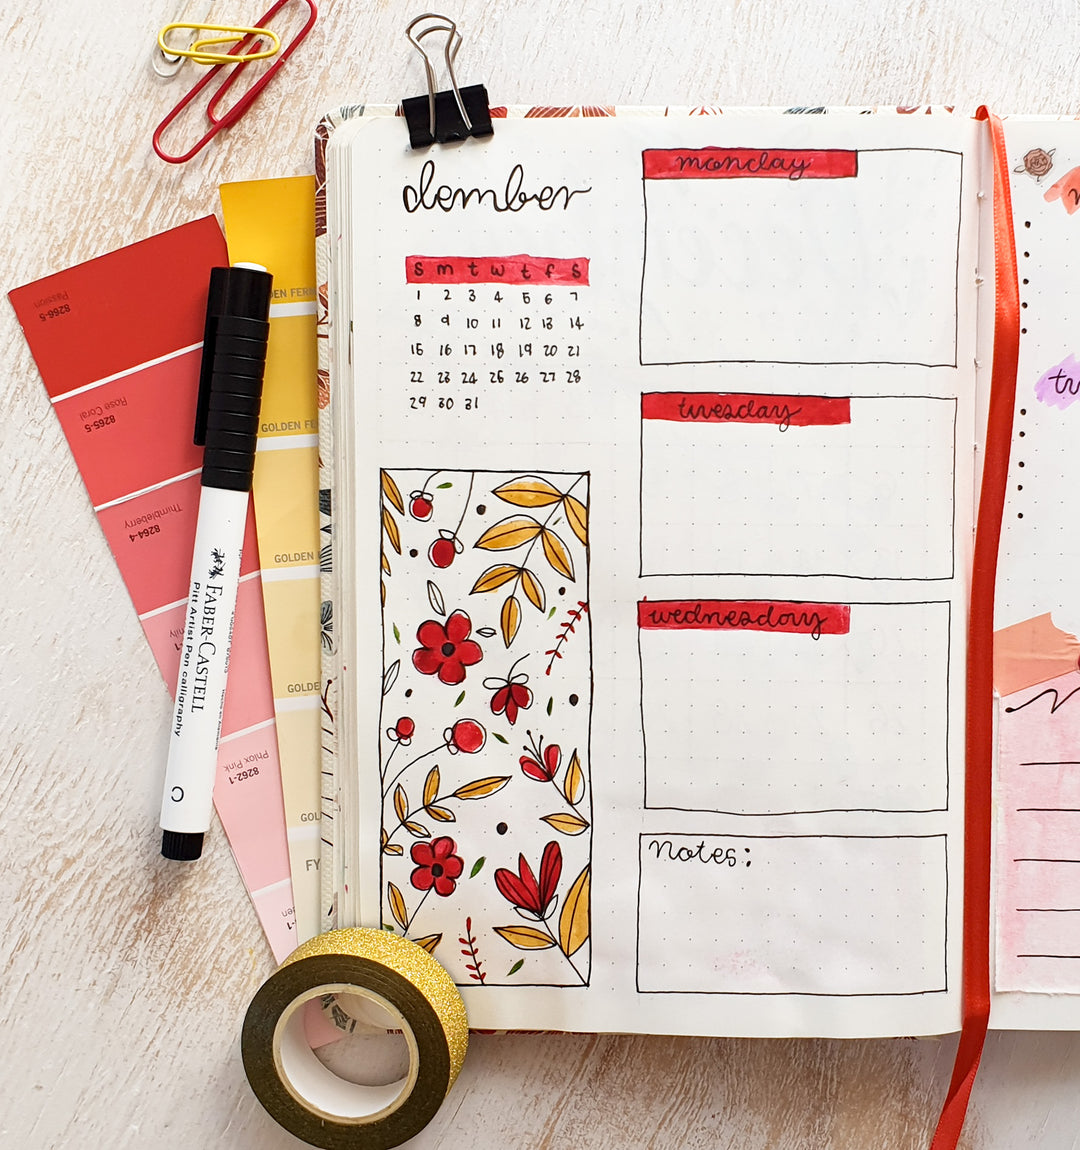 Image shows a journal spread in a premium dotted journal with red and yellow colours